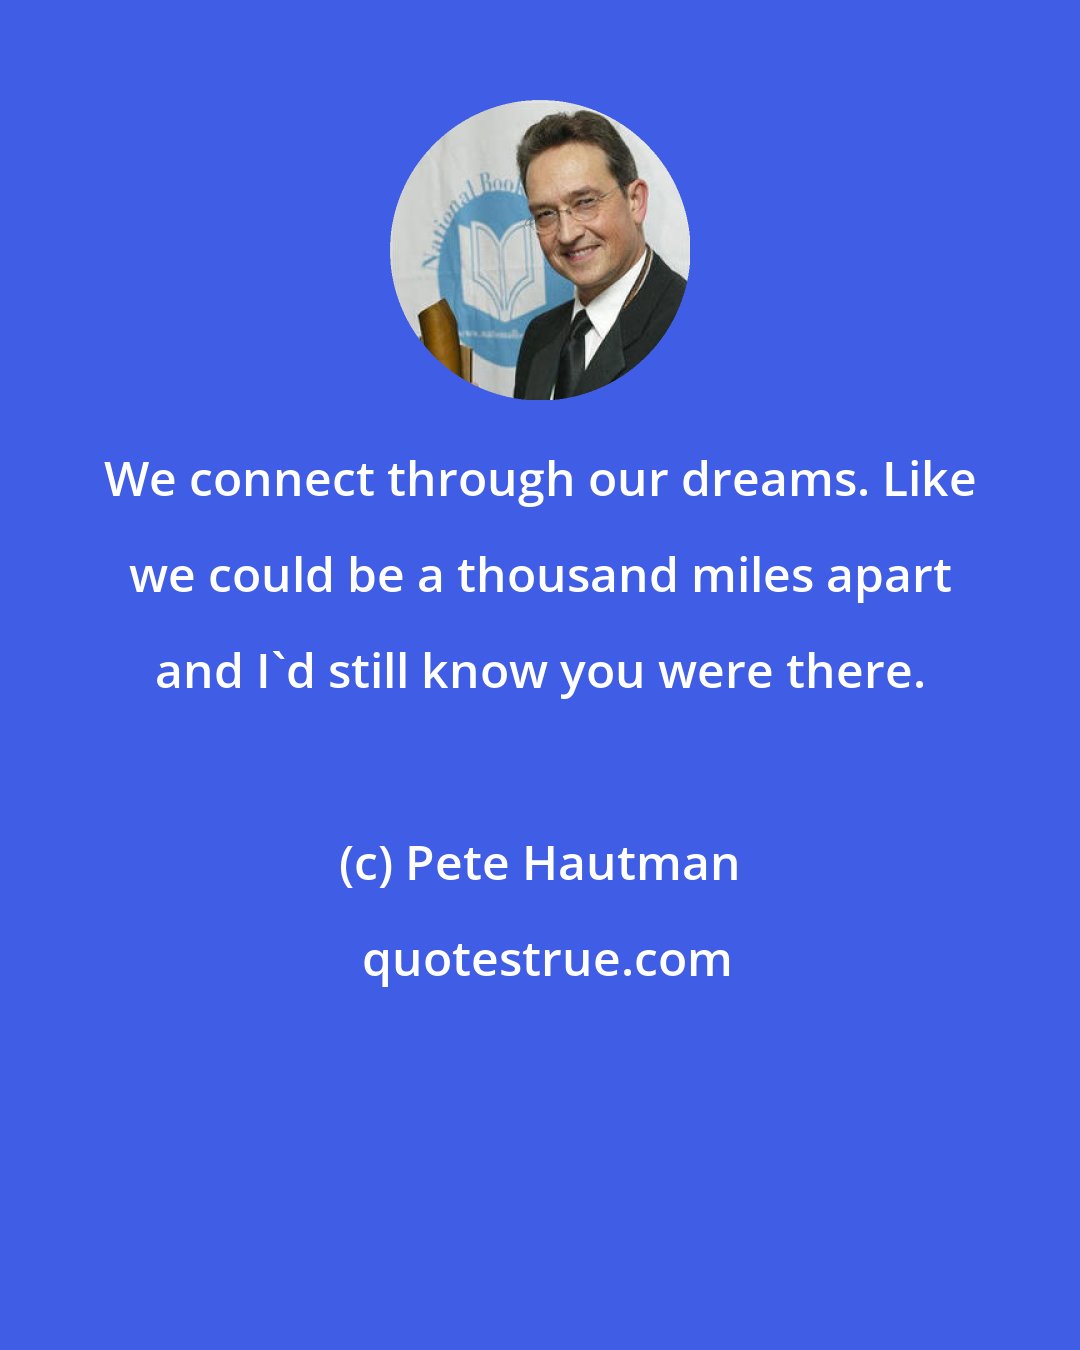 Pete Hautman: We connect through our dreams. Like we could be a thousand miles apart and I'd still know you were there.